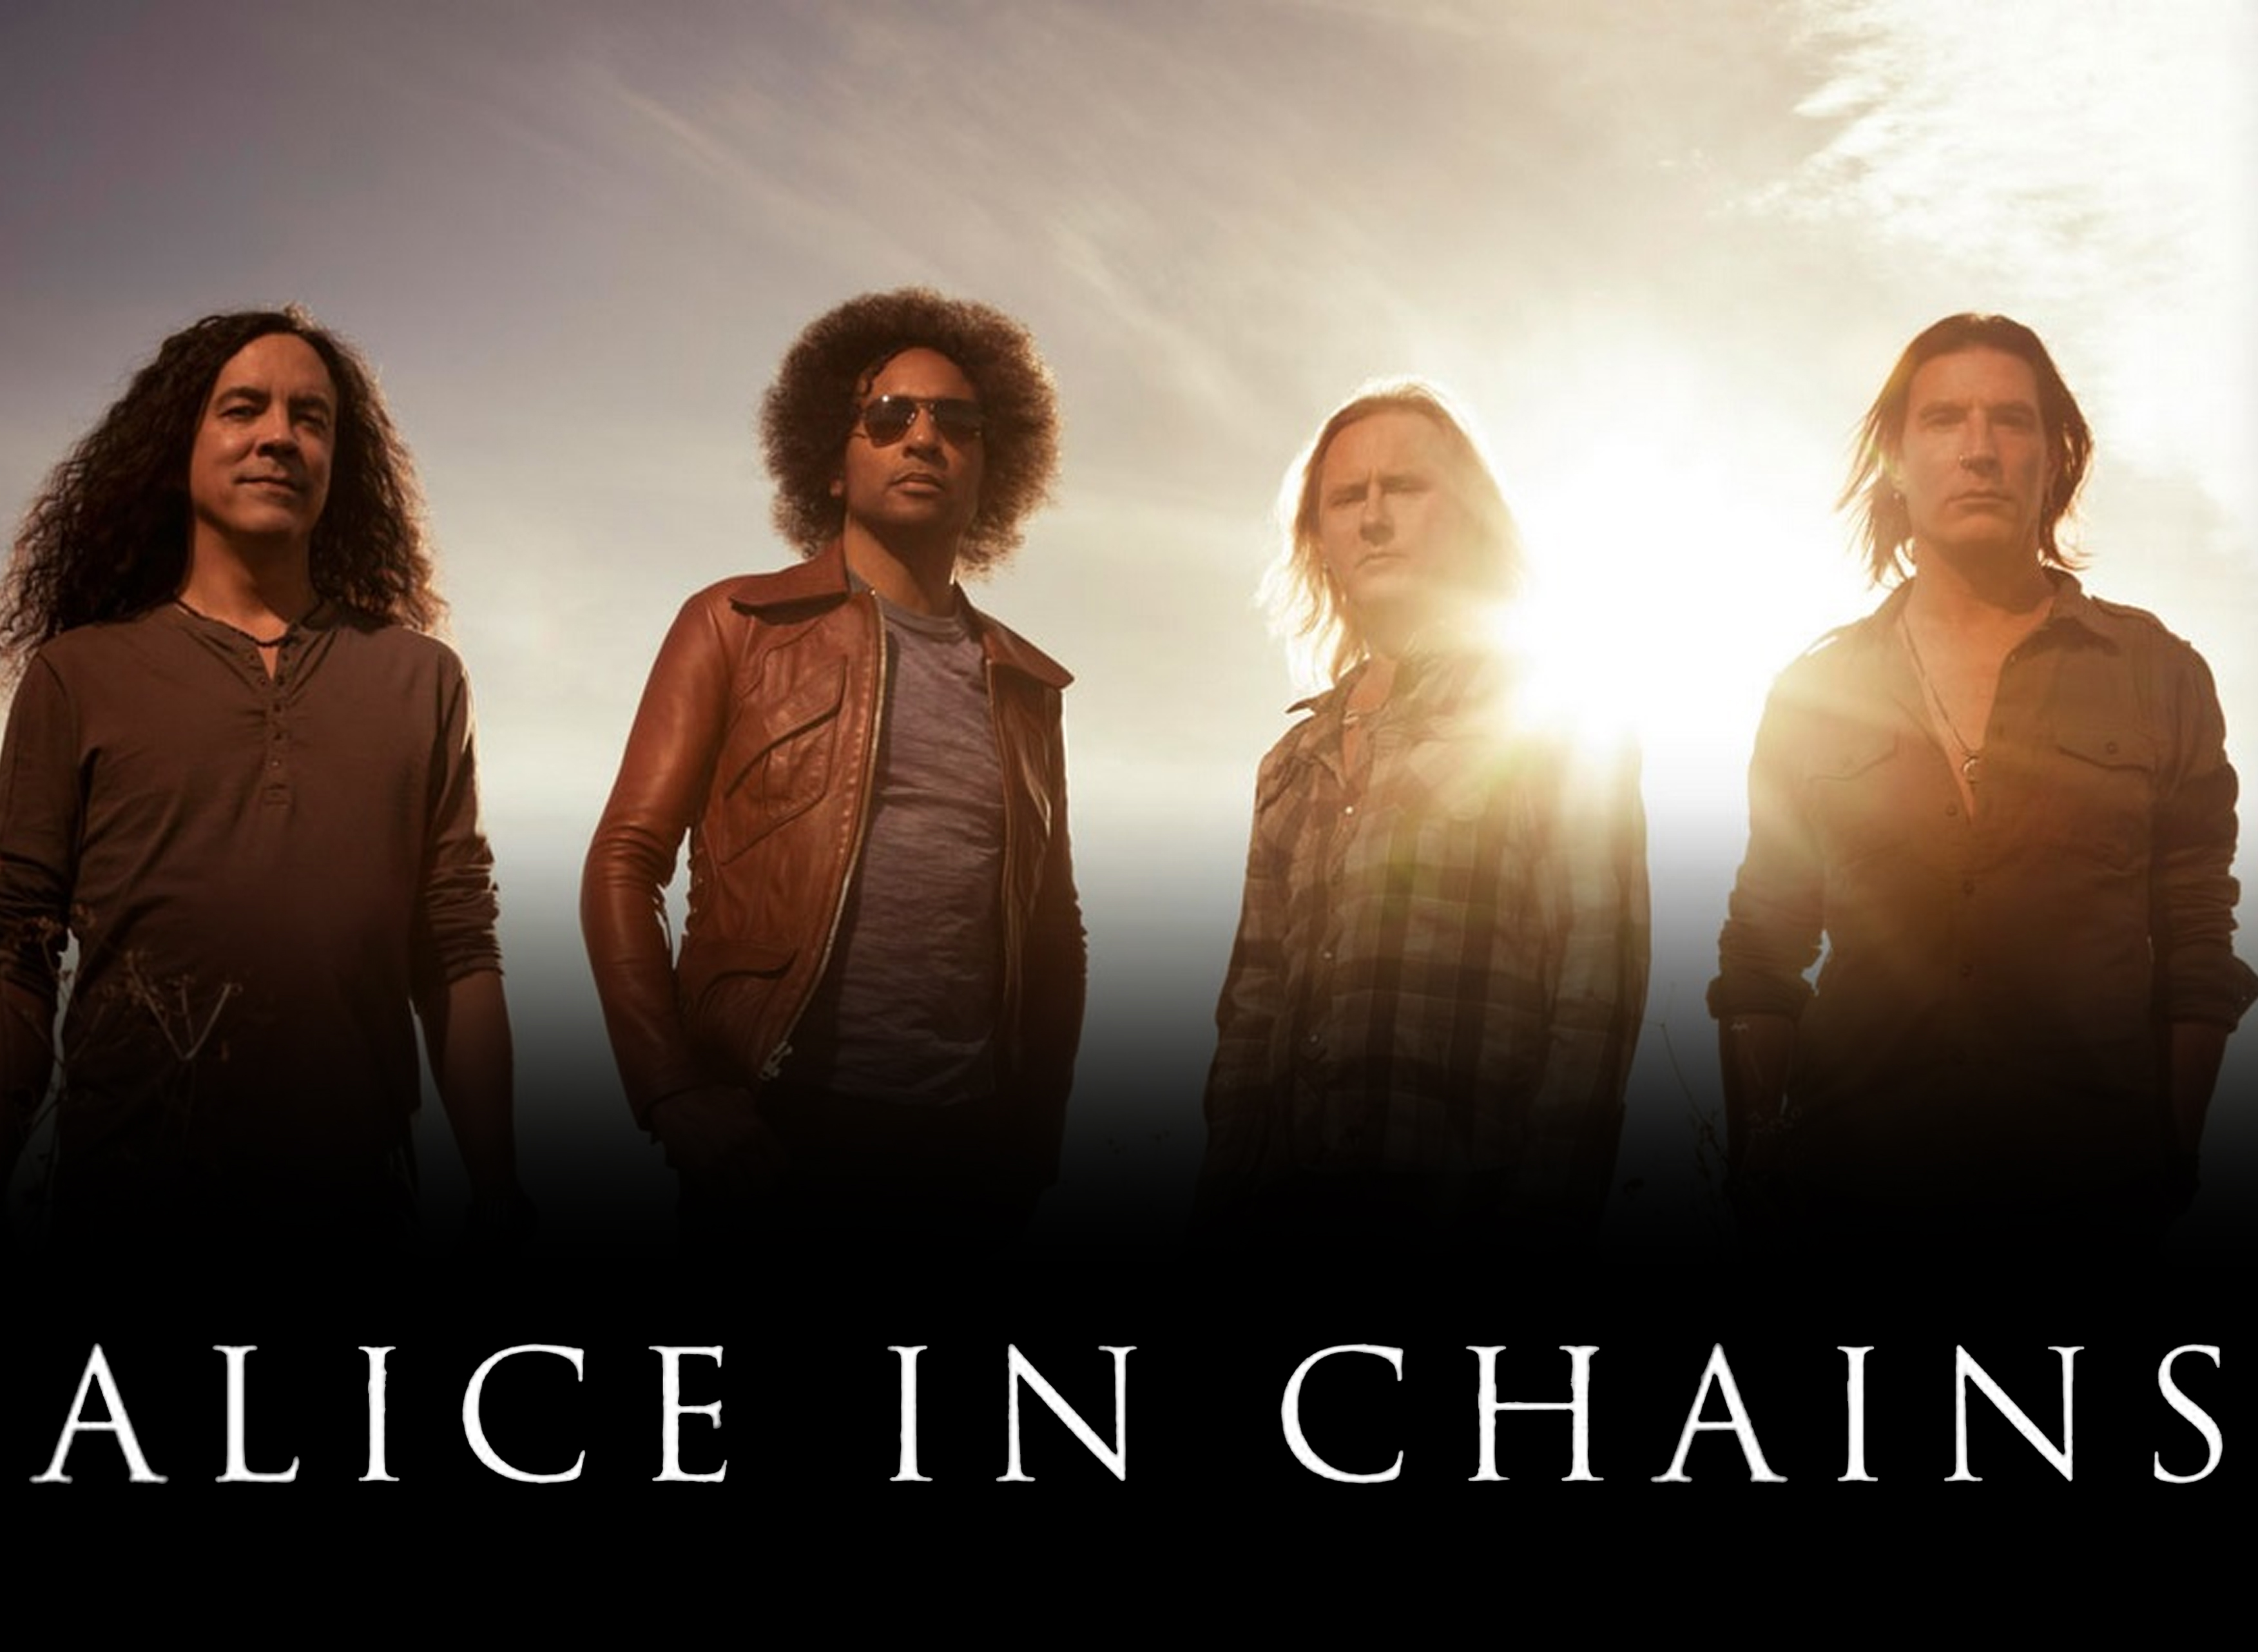 Cheap Trick, Soundgarden, Alice In Chains, and Device all confirmed for